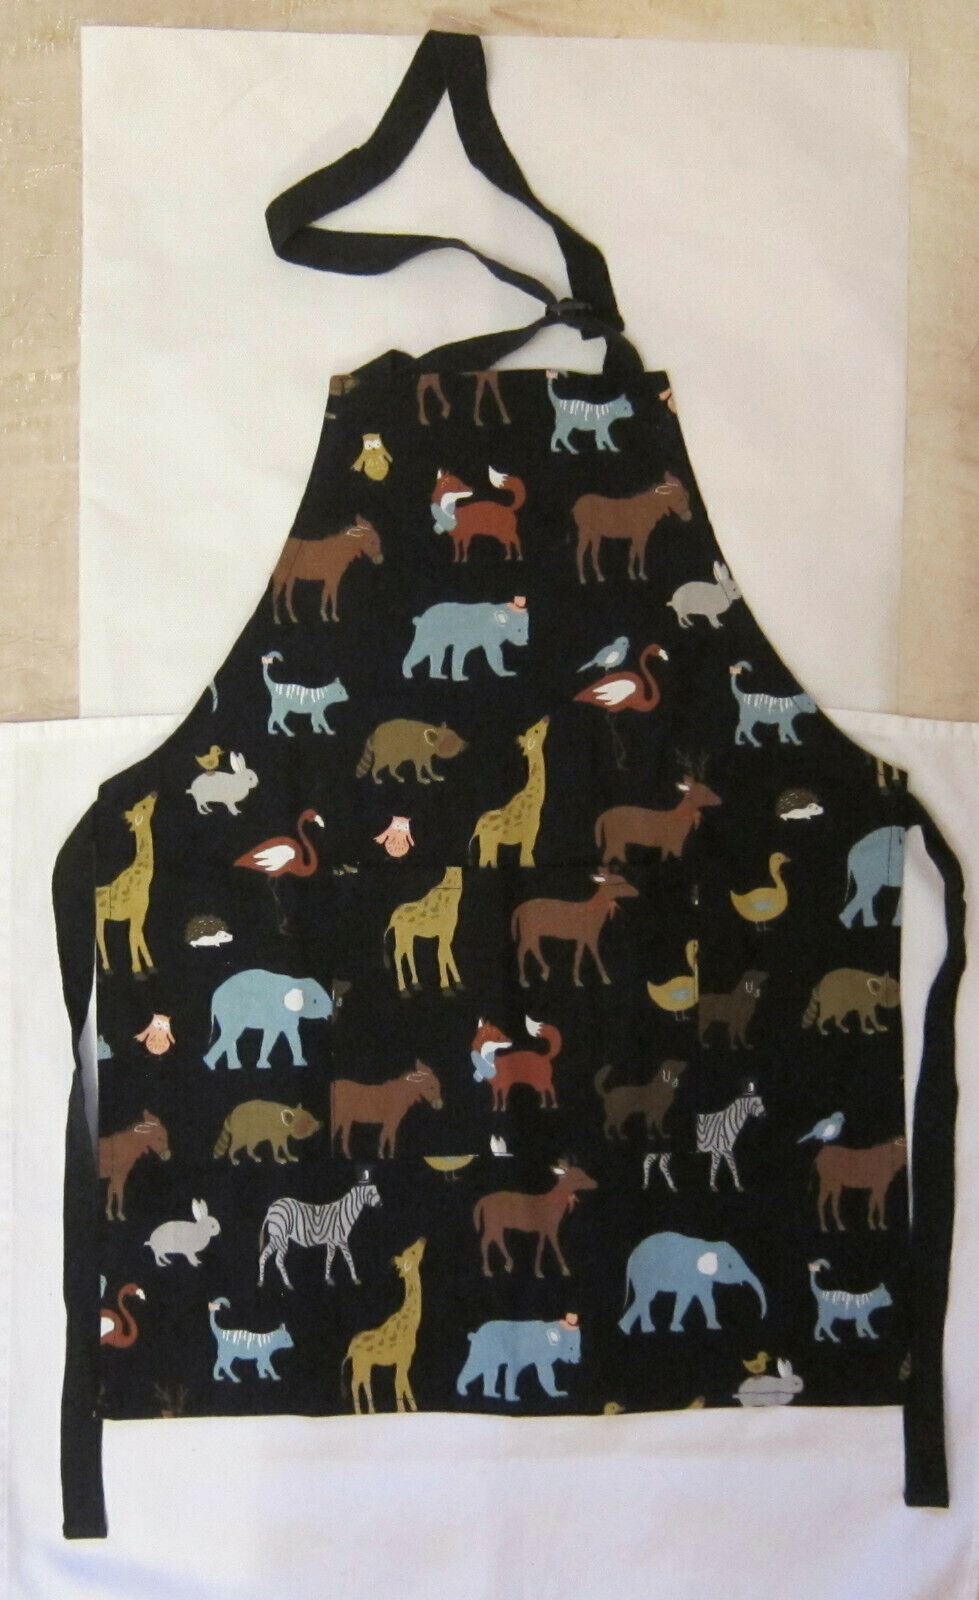 Ruier Home Brand New Child's Apron With Animals - Size Small (4 To 6)